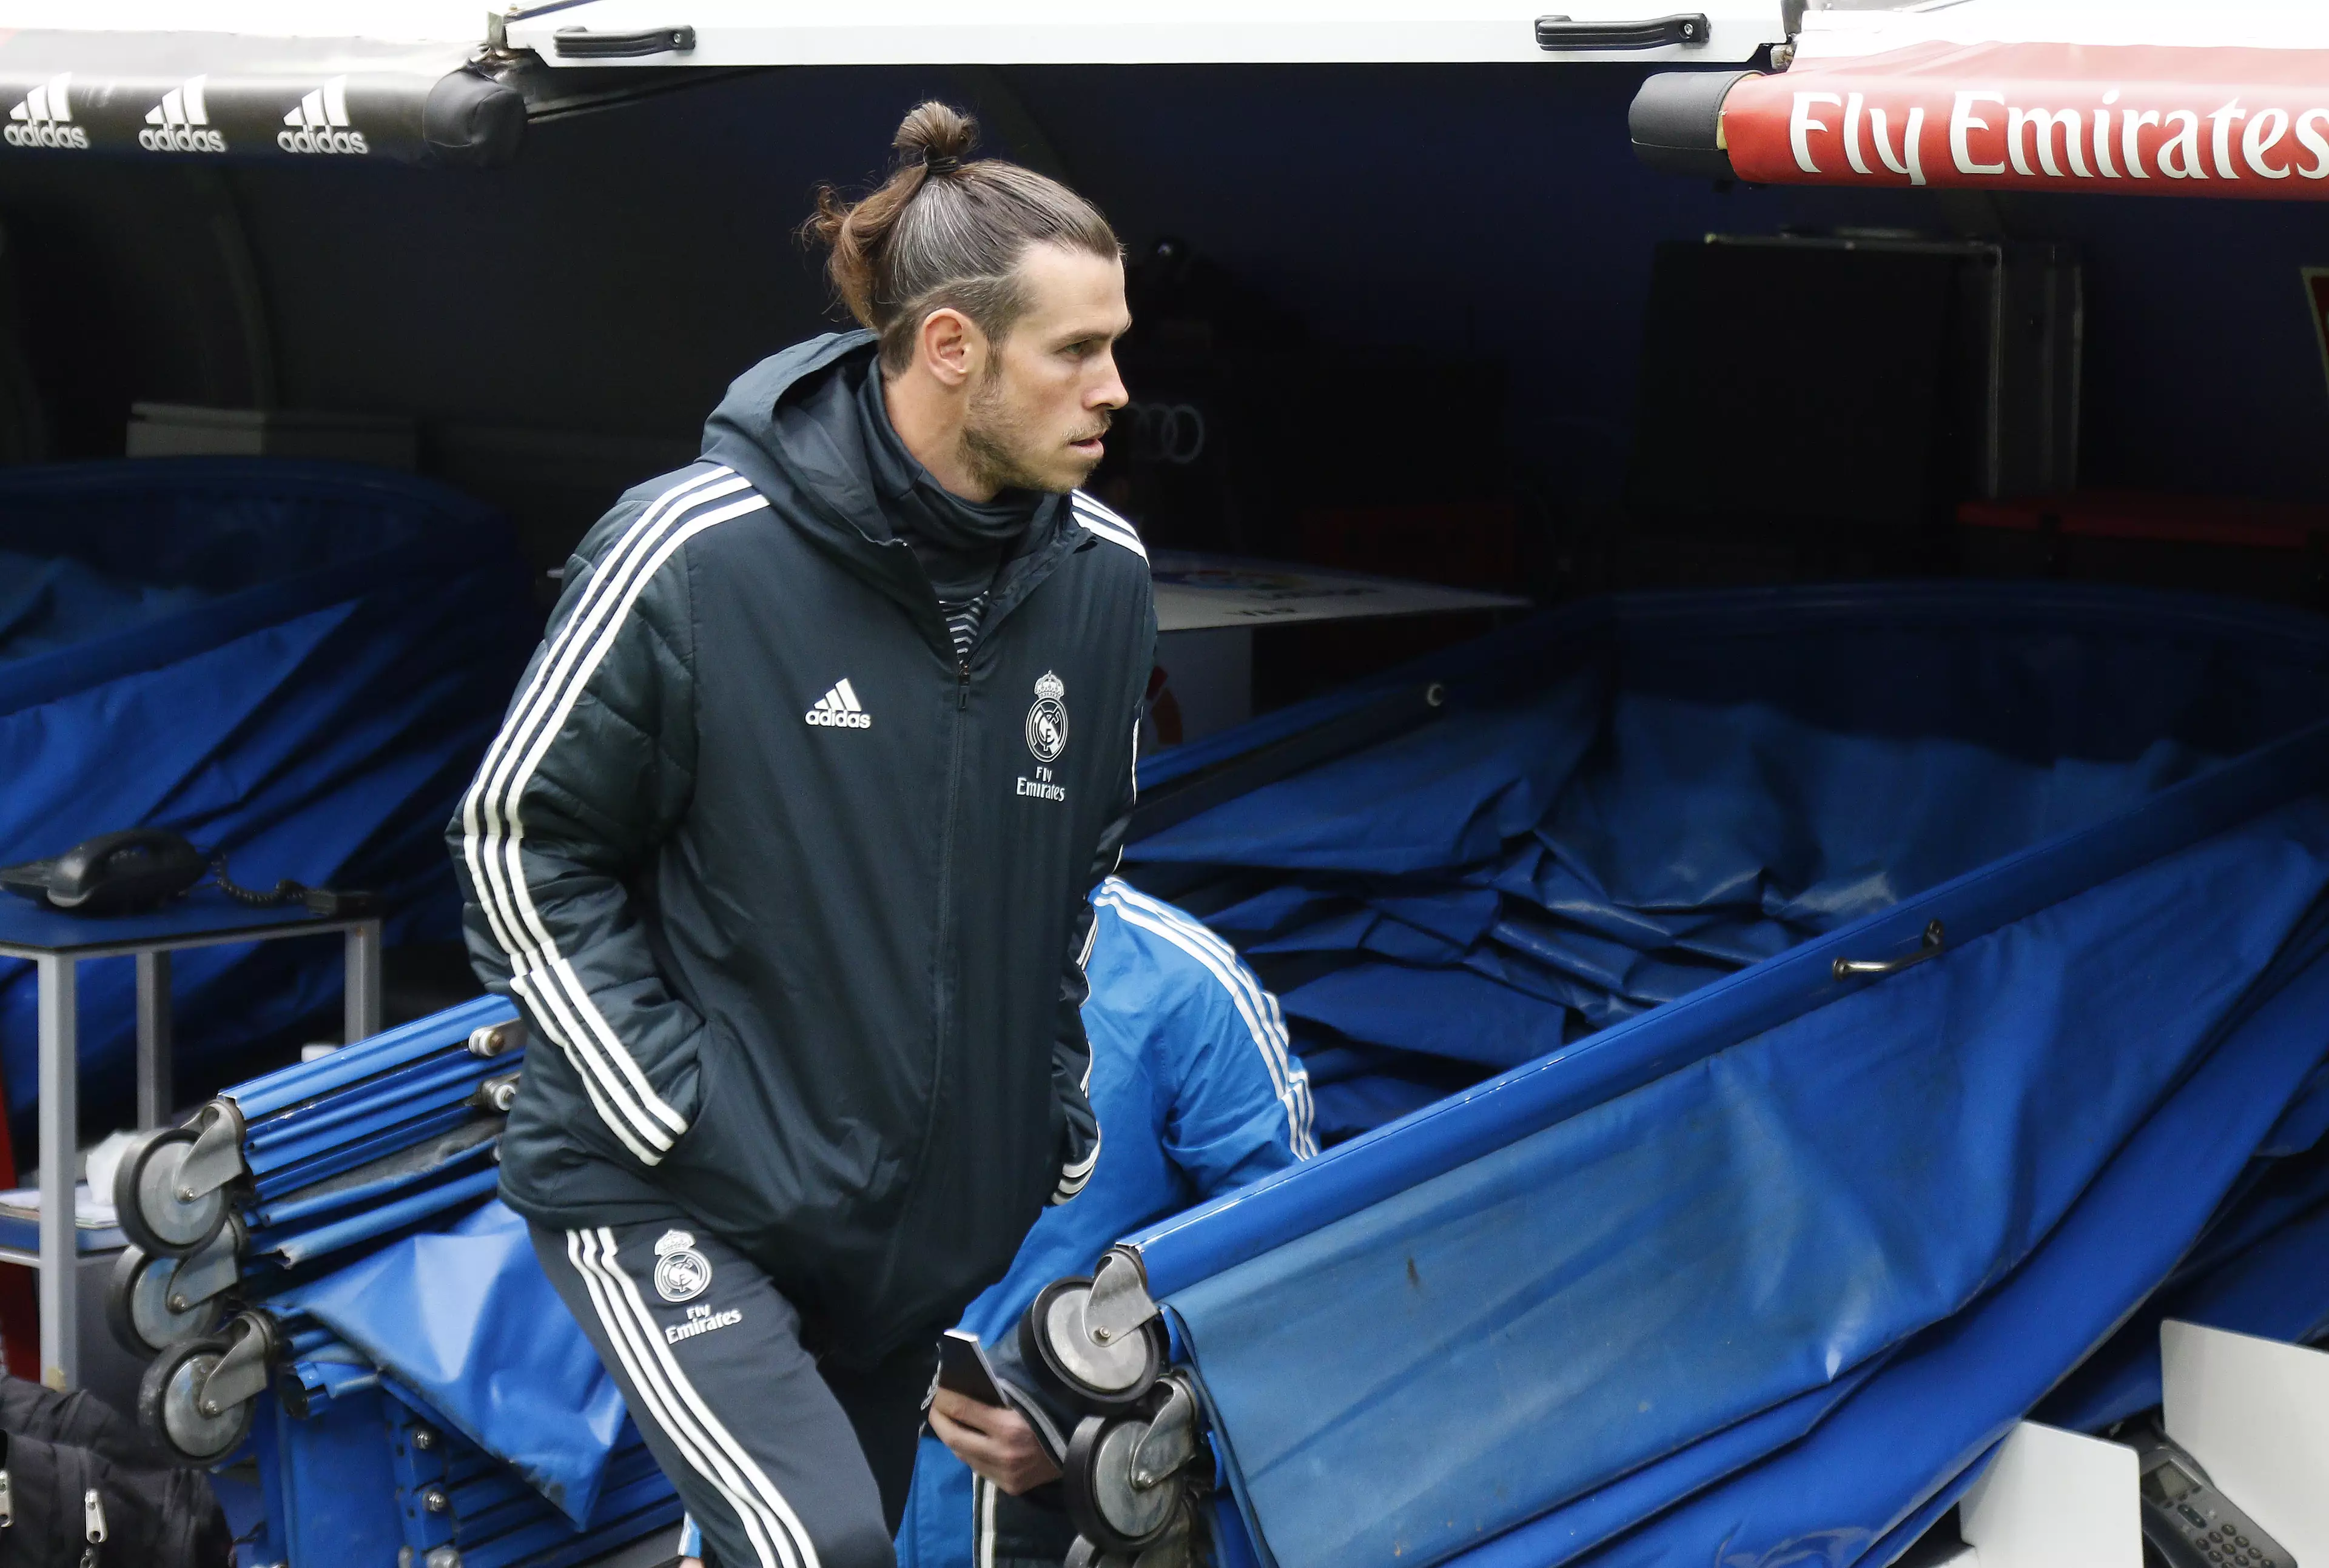 Bale ended the season as an unused sub in what could be his last game for Real. Image: PA Images